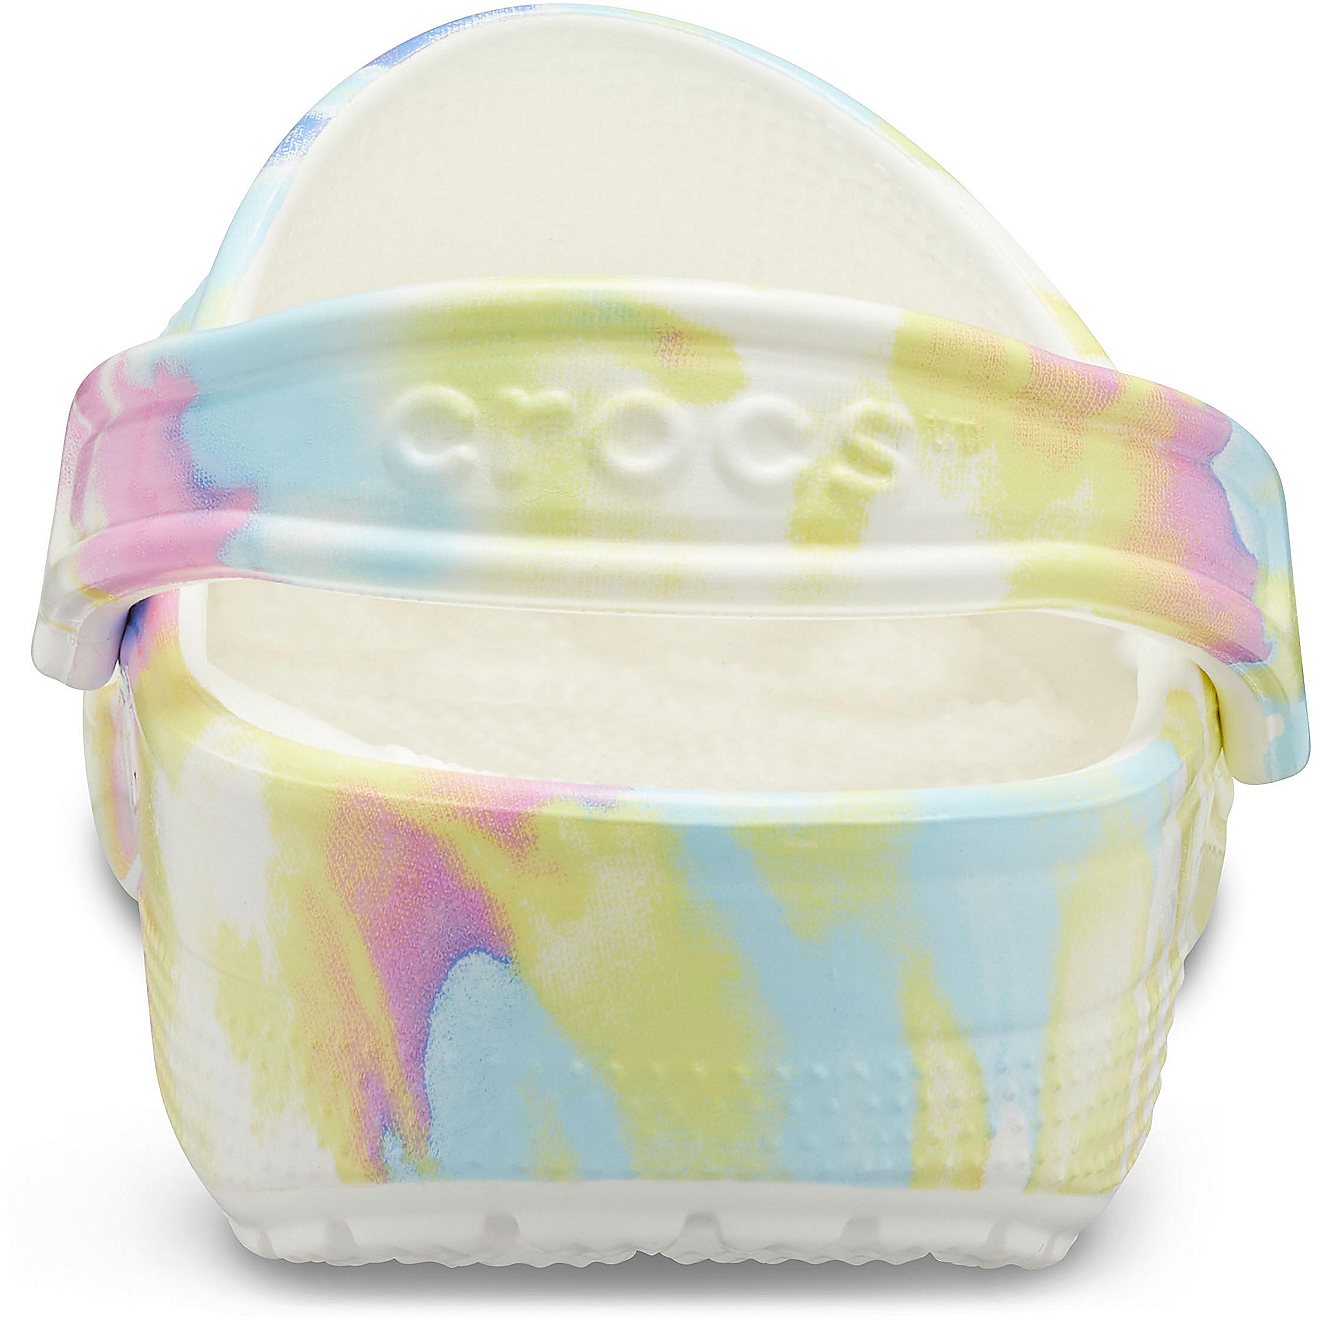 Crocs Kids' Classic Tie-Dye Graphic Clogs                                                                                        - view number 4